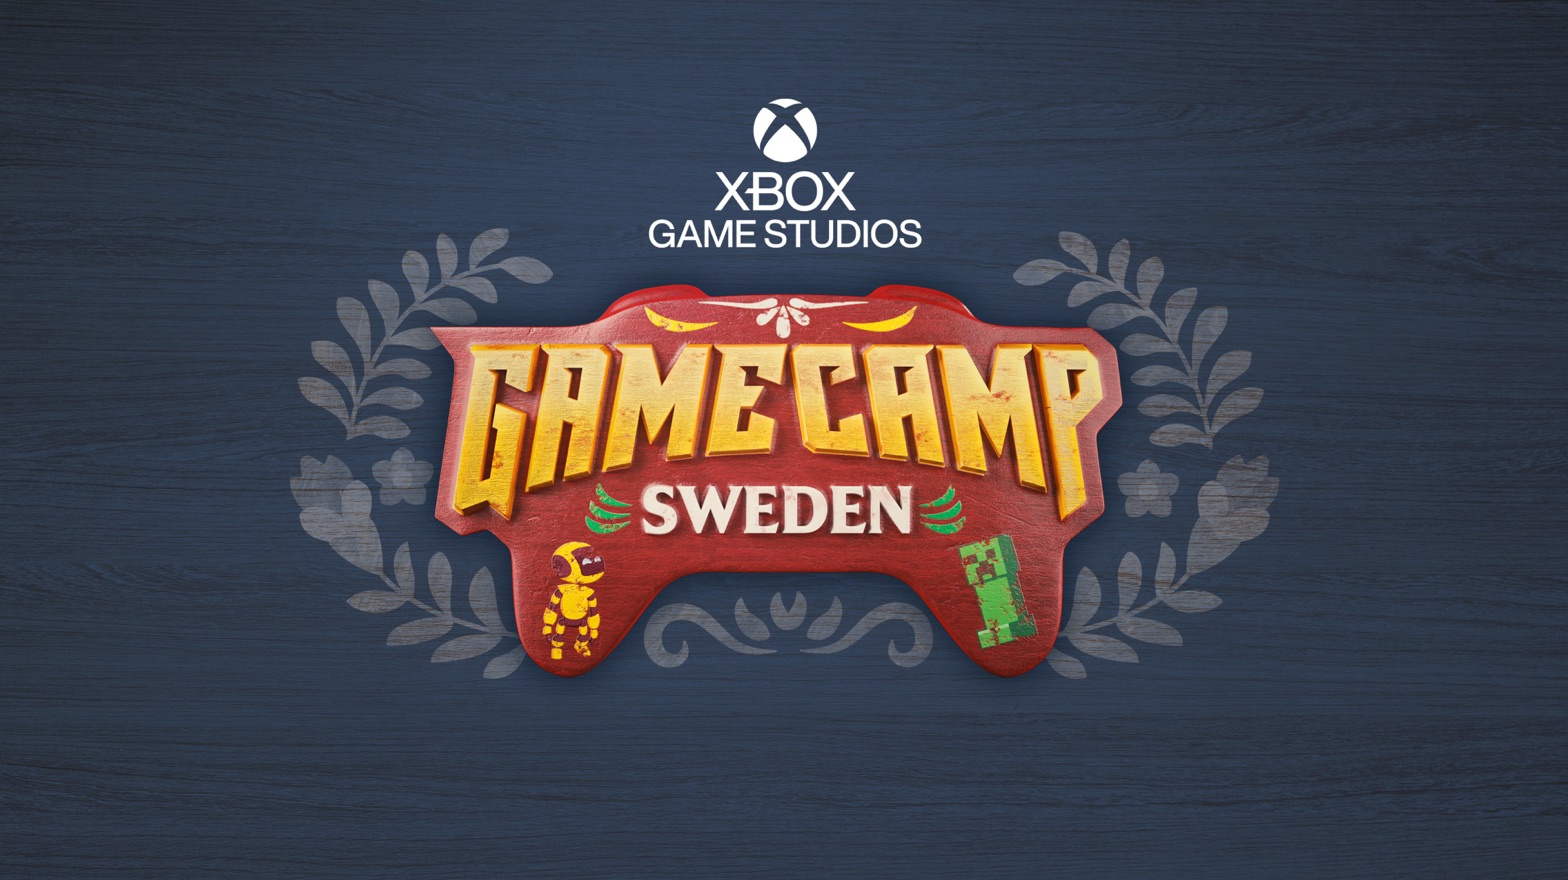 Hero image for Xbox Game Studios Game Camp Sweden with logo